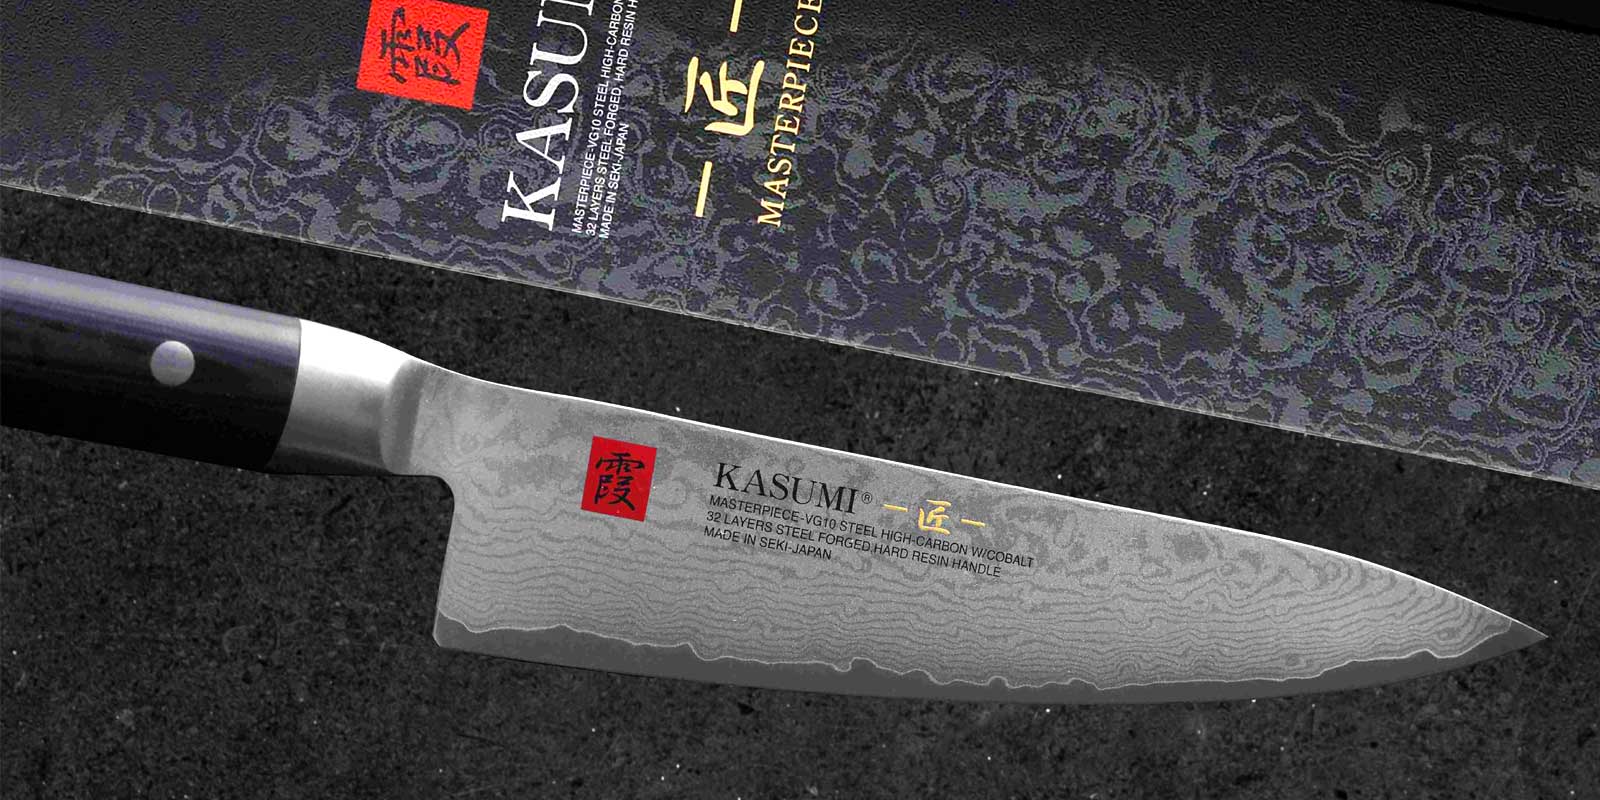 Kasumi knife The center layer of the KASUMI MP blades is made of the best Japanese VG10 steel 